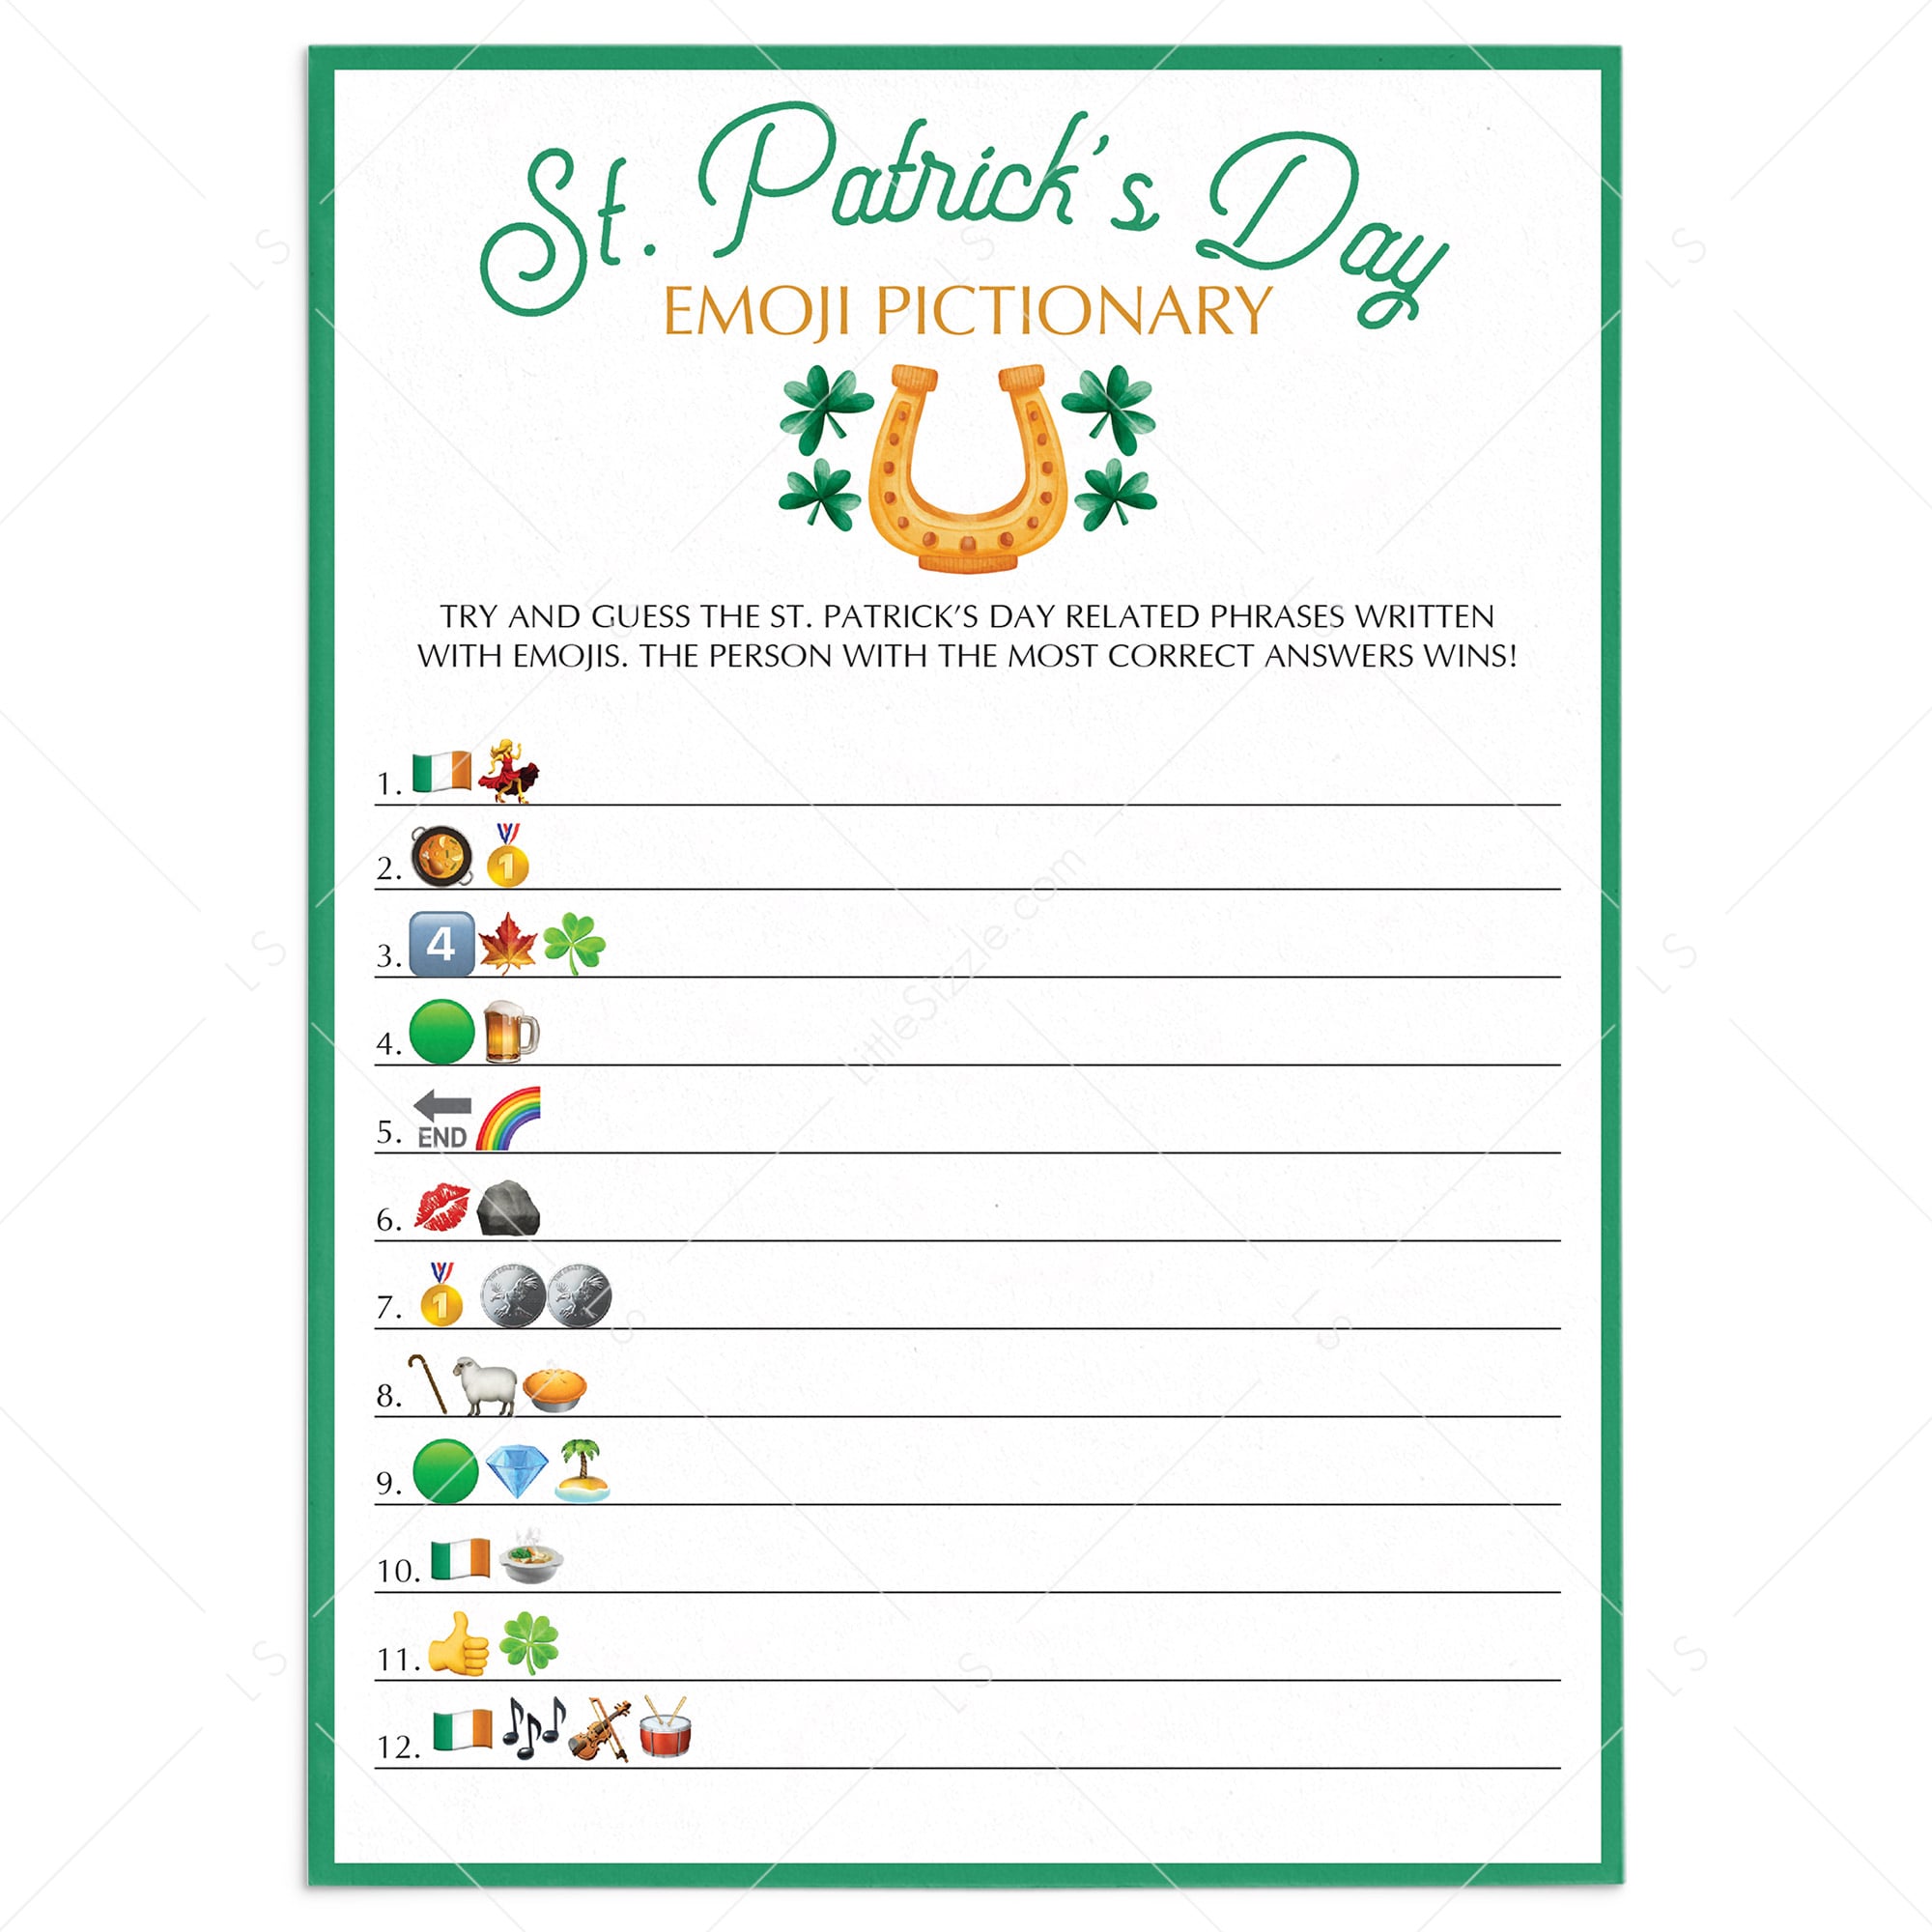 St. Patrick's Day Game Emoji Pictionary Printable & Virtual by LittleSizzle